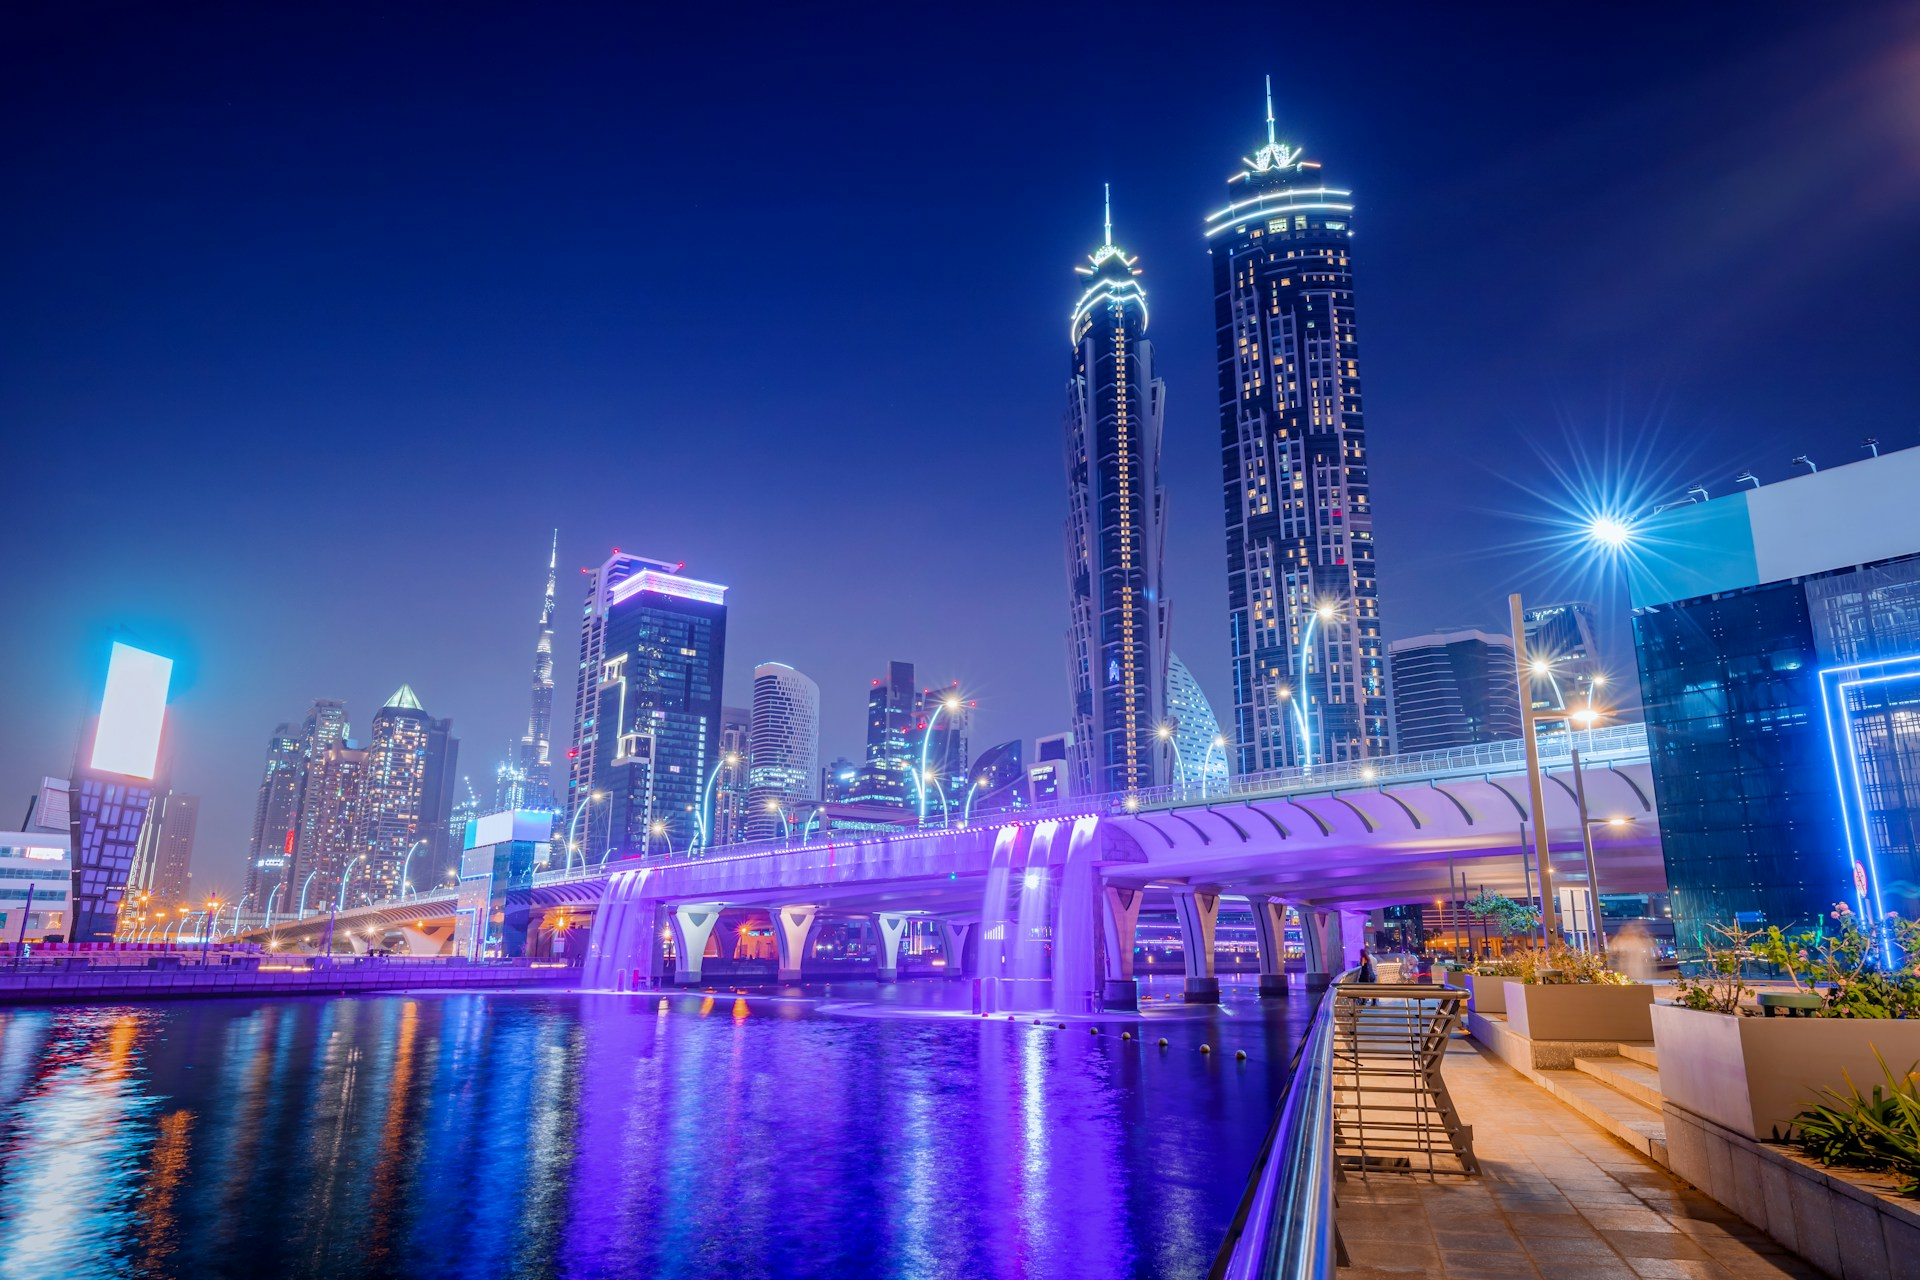 Few places in the world will grab yoiur attention like Dubai Downtown does.